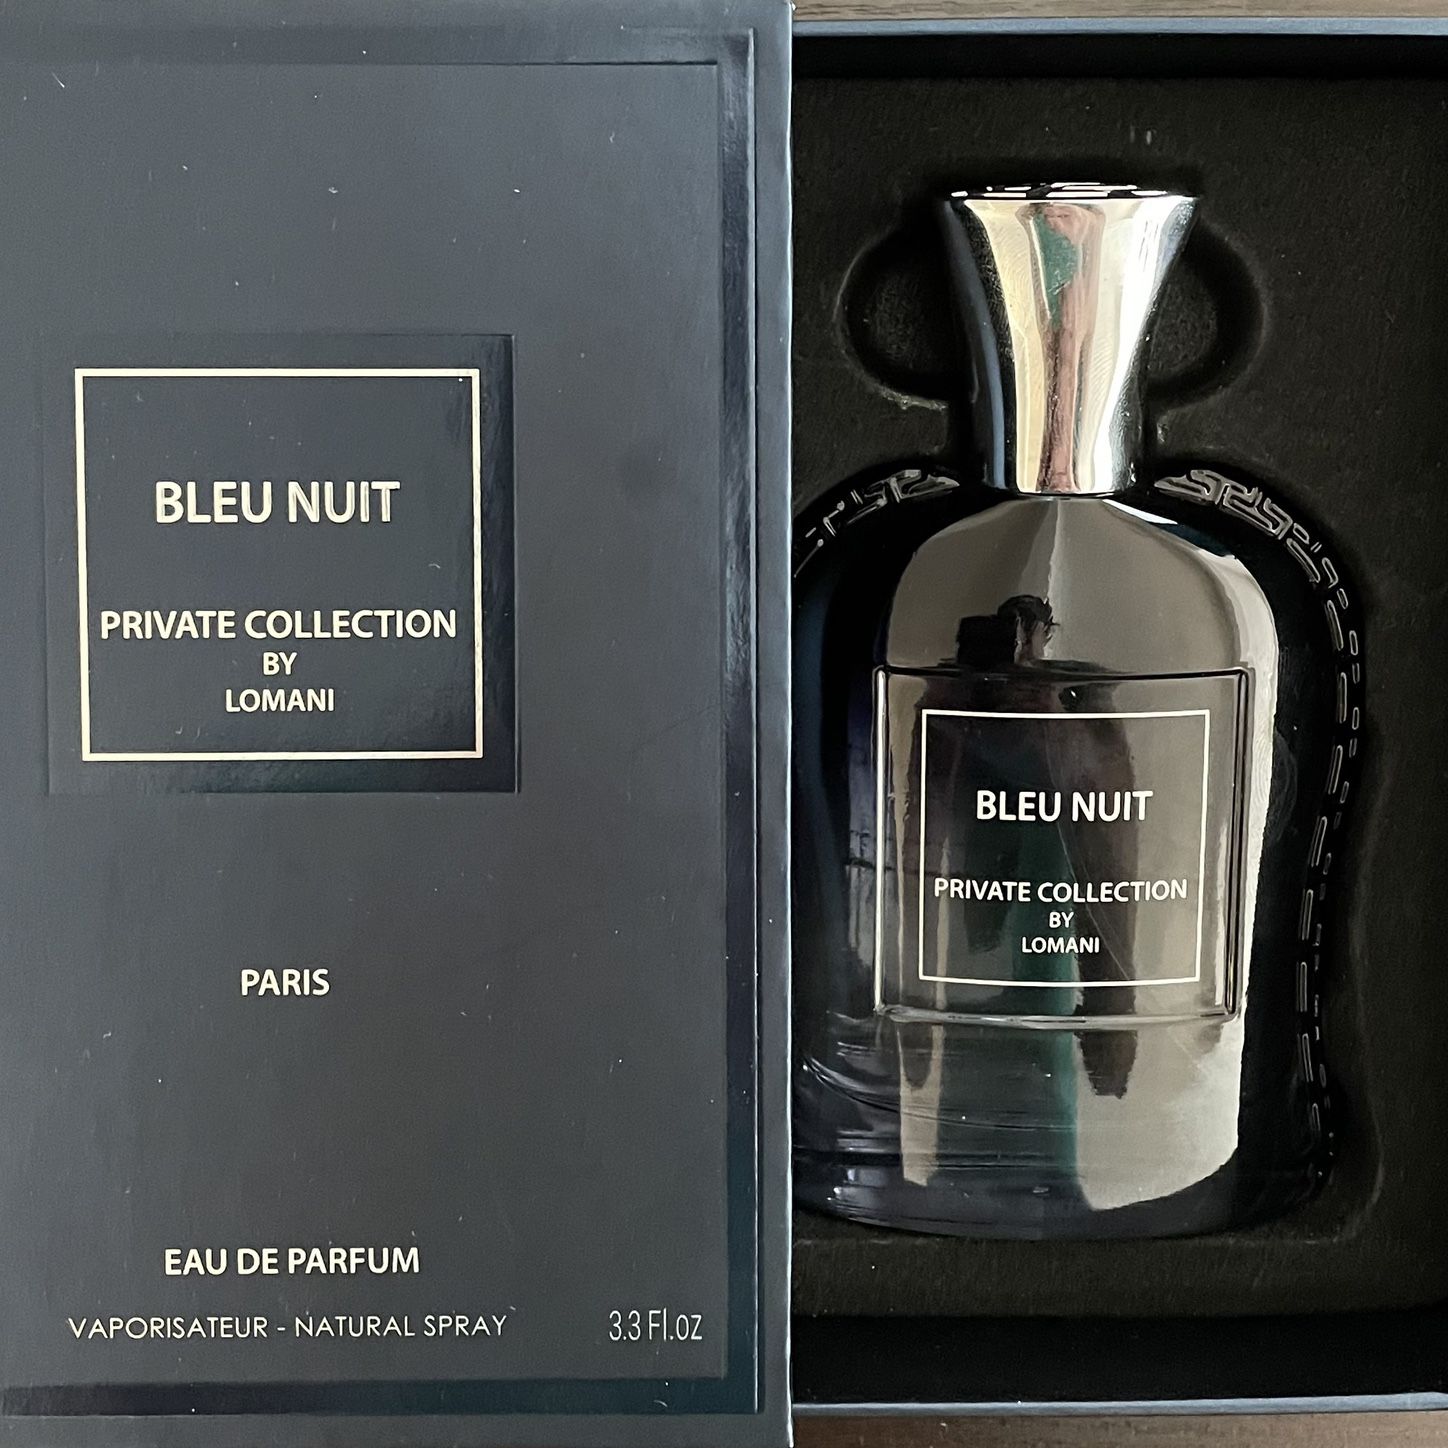 BLEU NUIT Private Collection by Lomani for Sale in New York, NY - OfferUp